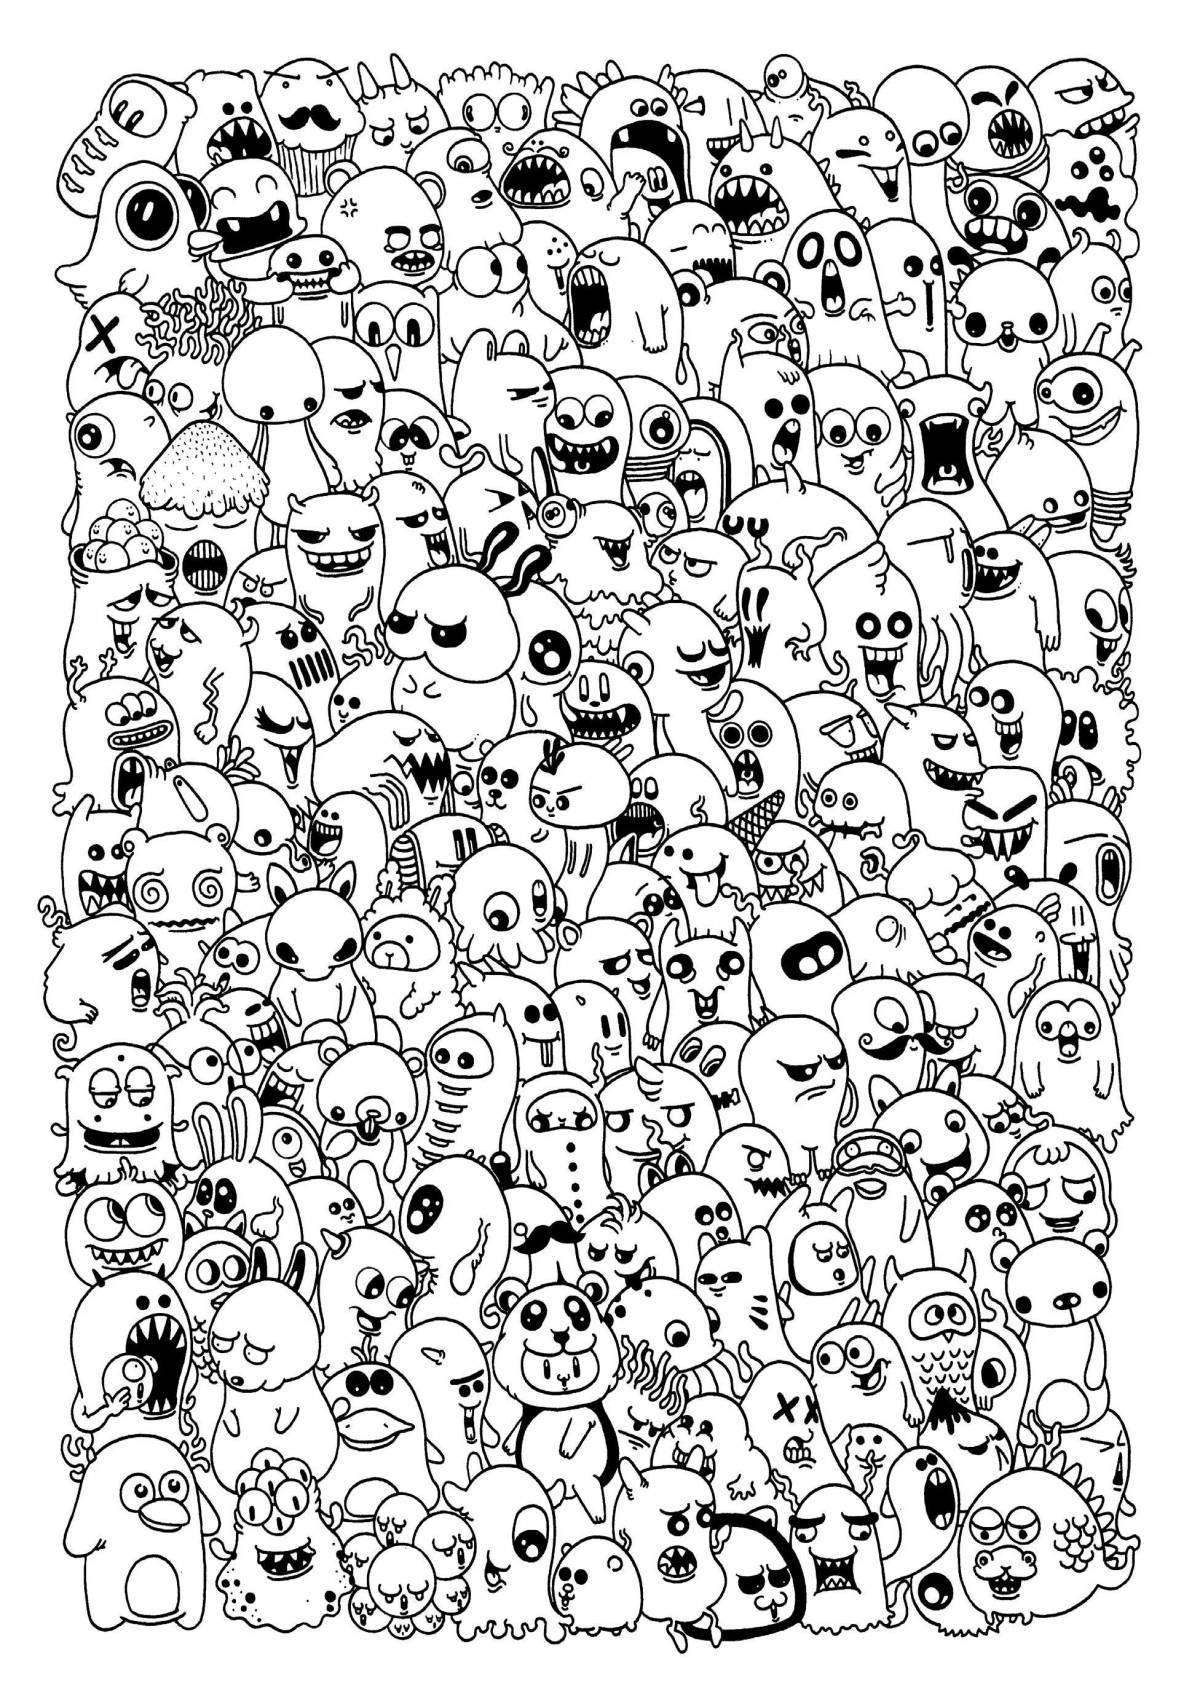 Color-deluge coloring page many at once